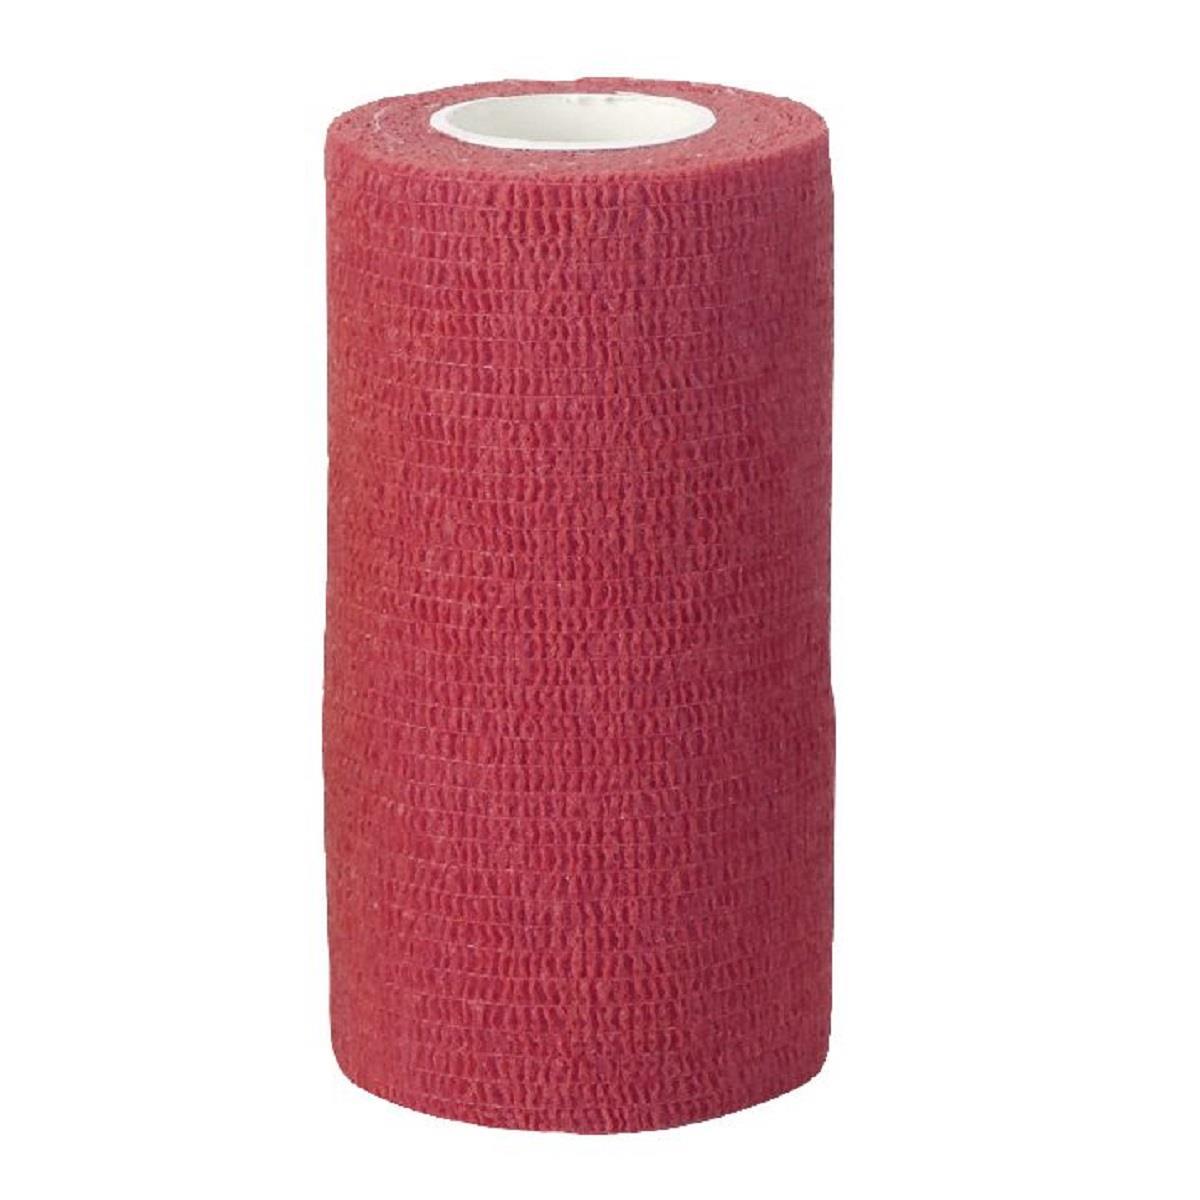 Selbsthaftende Bandage EquiLastic